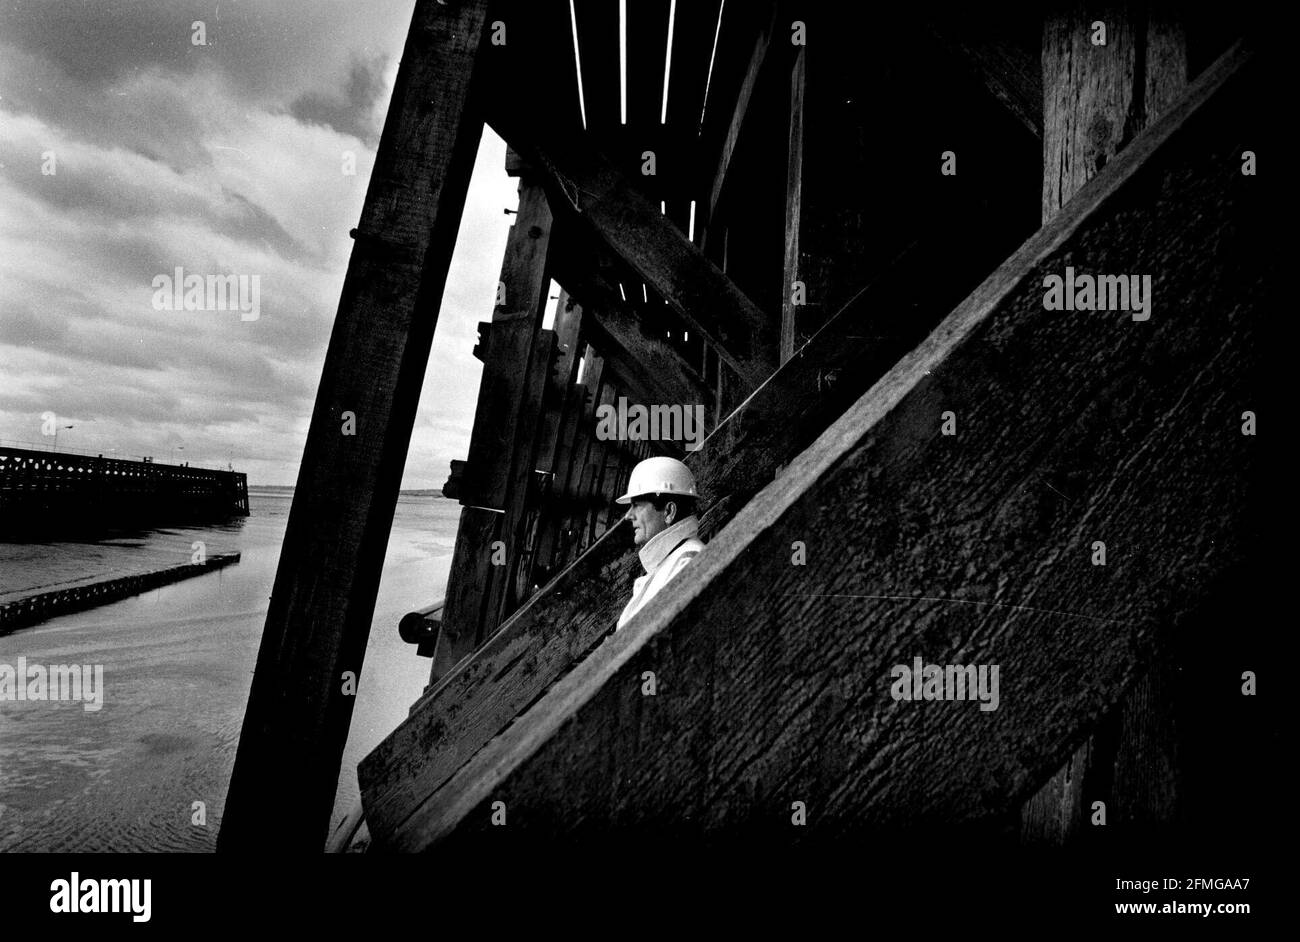 PHIL WHITE SITE SUPERVISOR INSPECTS THE OLD AND NEW TIMBERS OF SHARPNESS NORTH PIER WHICH DATES BACK TO THE 1870S AND IS UNDERGOING EXTENSIVE REPAIRS. BRITISH WATERWAYS WHO ARE UNDERTAKING THE WORK ARE USING HUGE GREENHEART TIMBERS  TO REPAIR THE PIER. Stock Photo